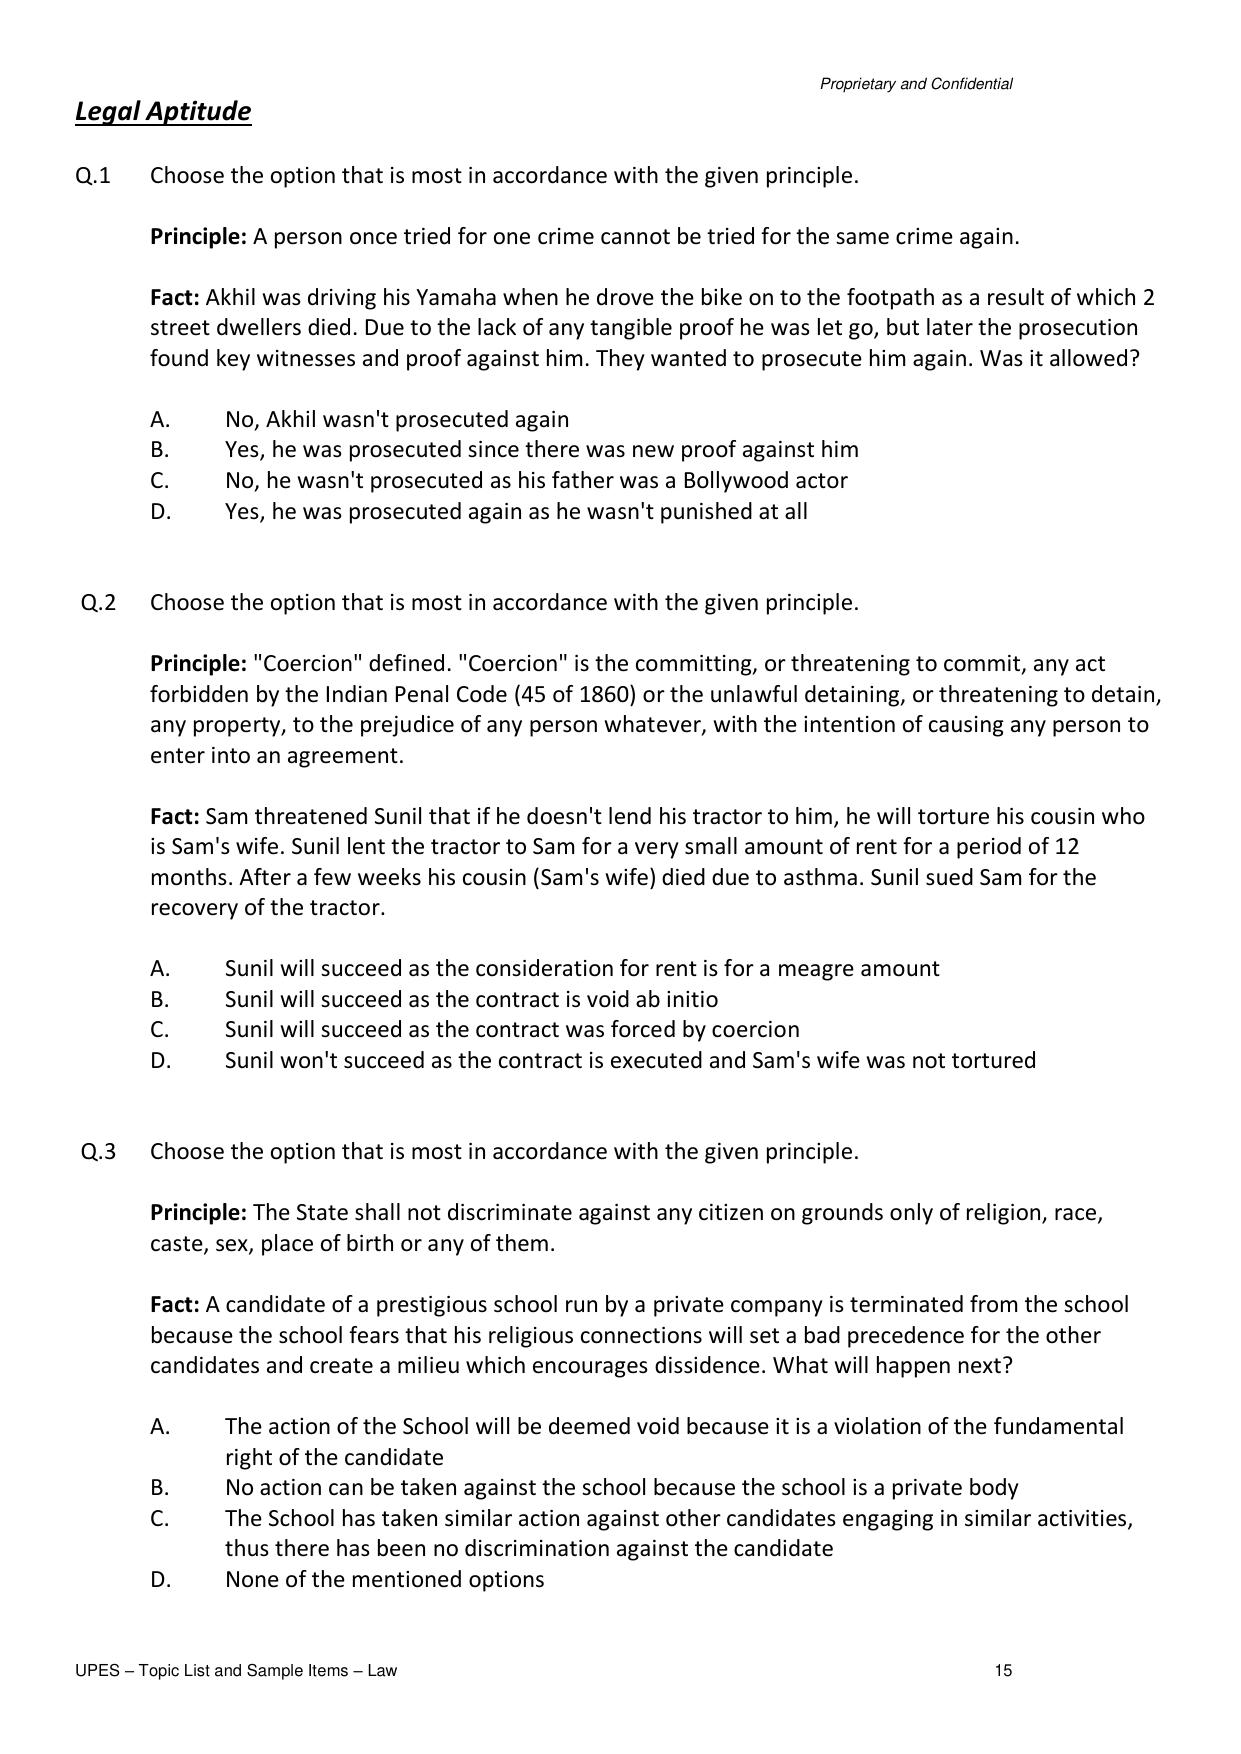 UPES Law Sample Papers - Page 15